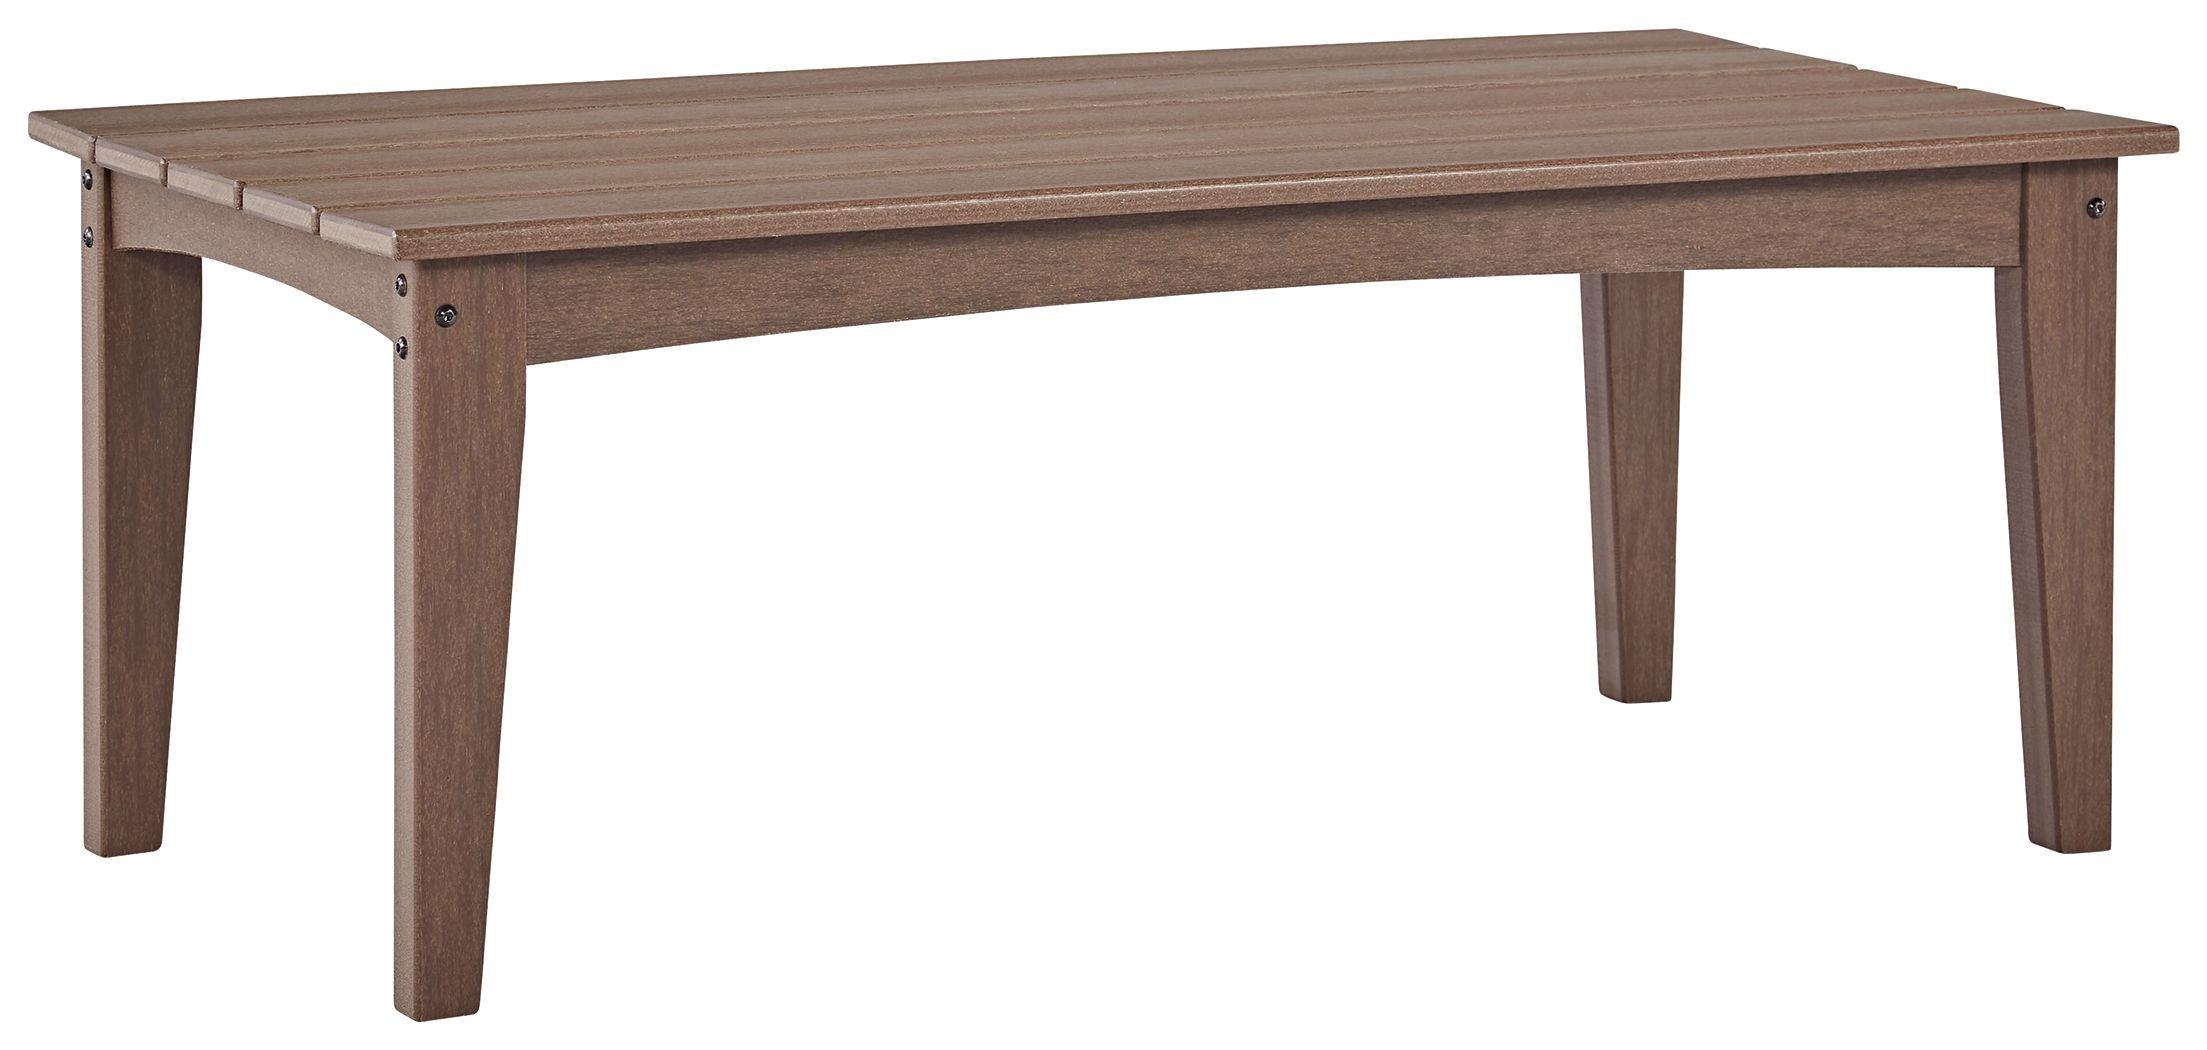 Signature Design by Ashley® - Emmeline - Brown - Rectangular Cocktail Table - 5th Avenue Furniture